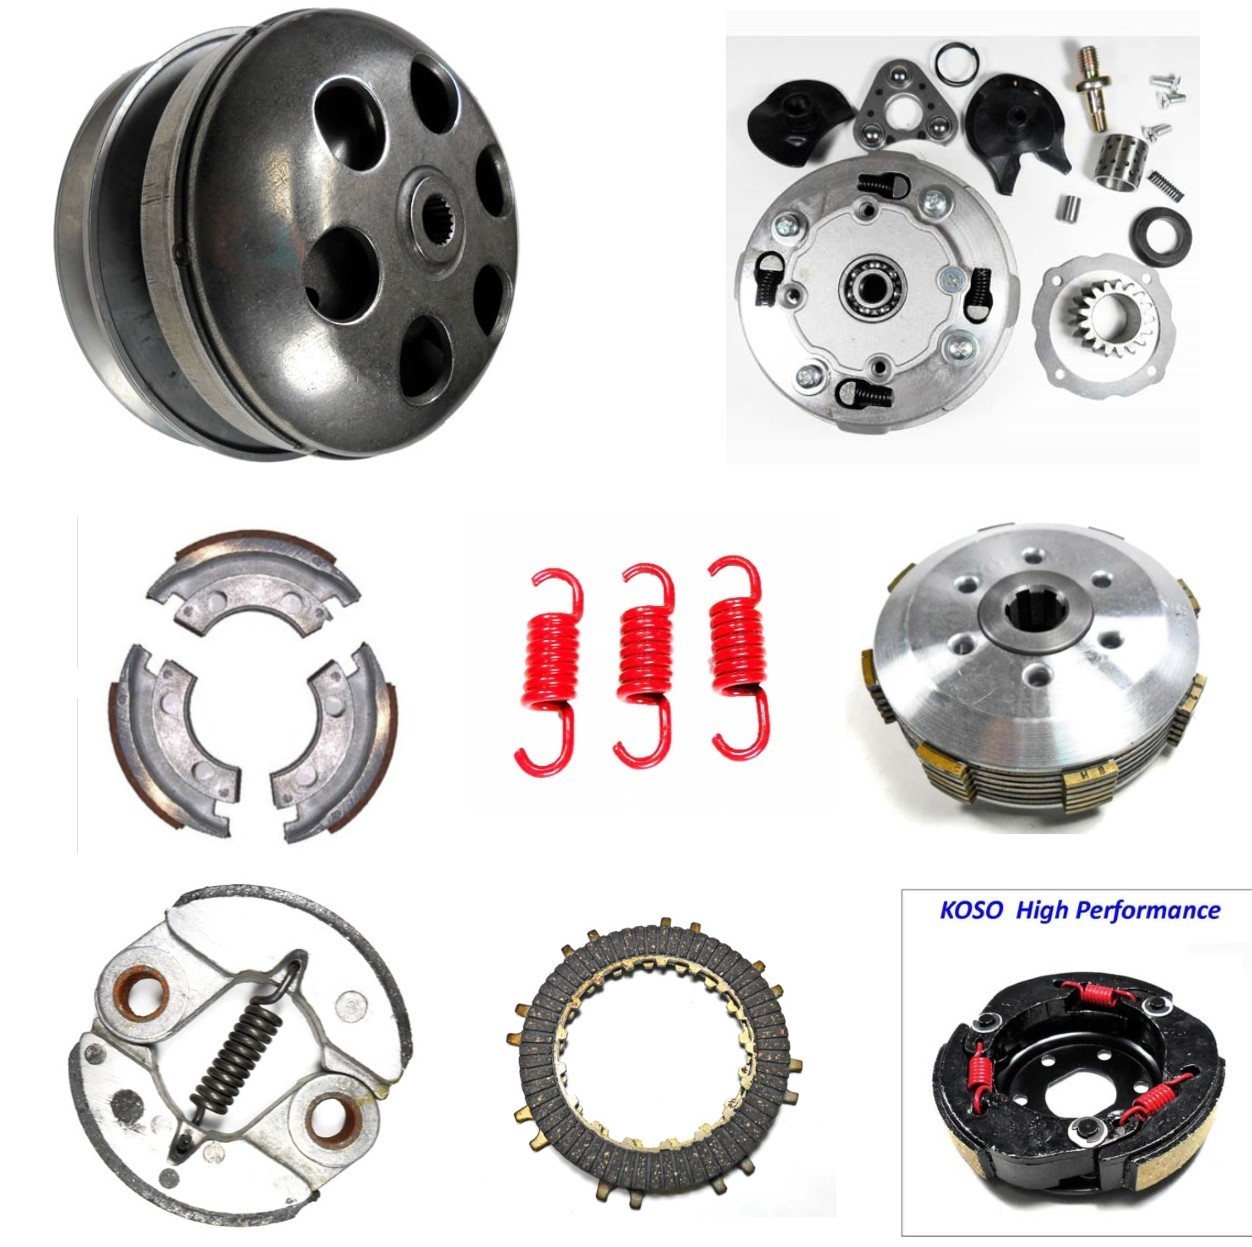 49-600cc Clutch & Clutch Parts For Most Scooters-ATVs-GoKarts-UTVs